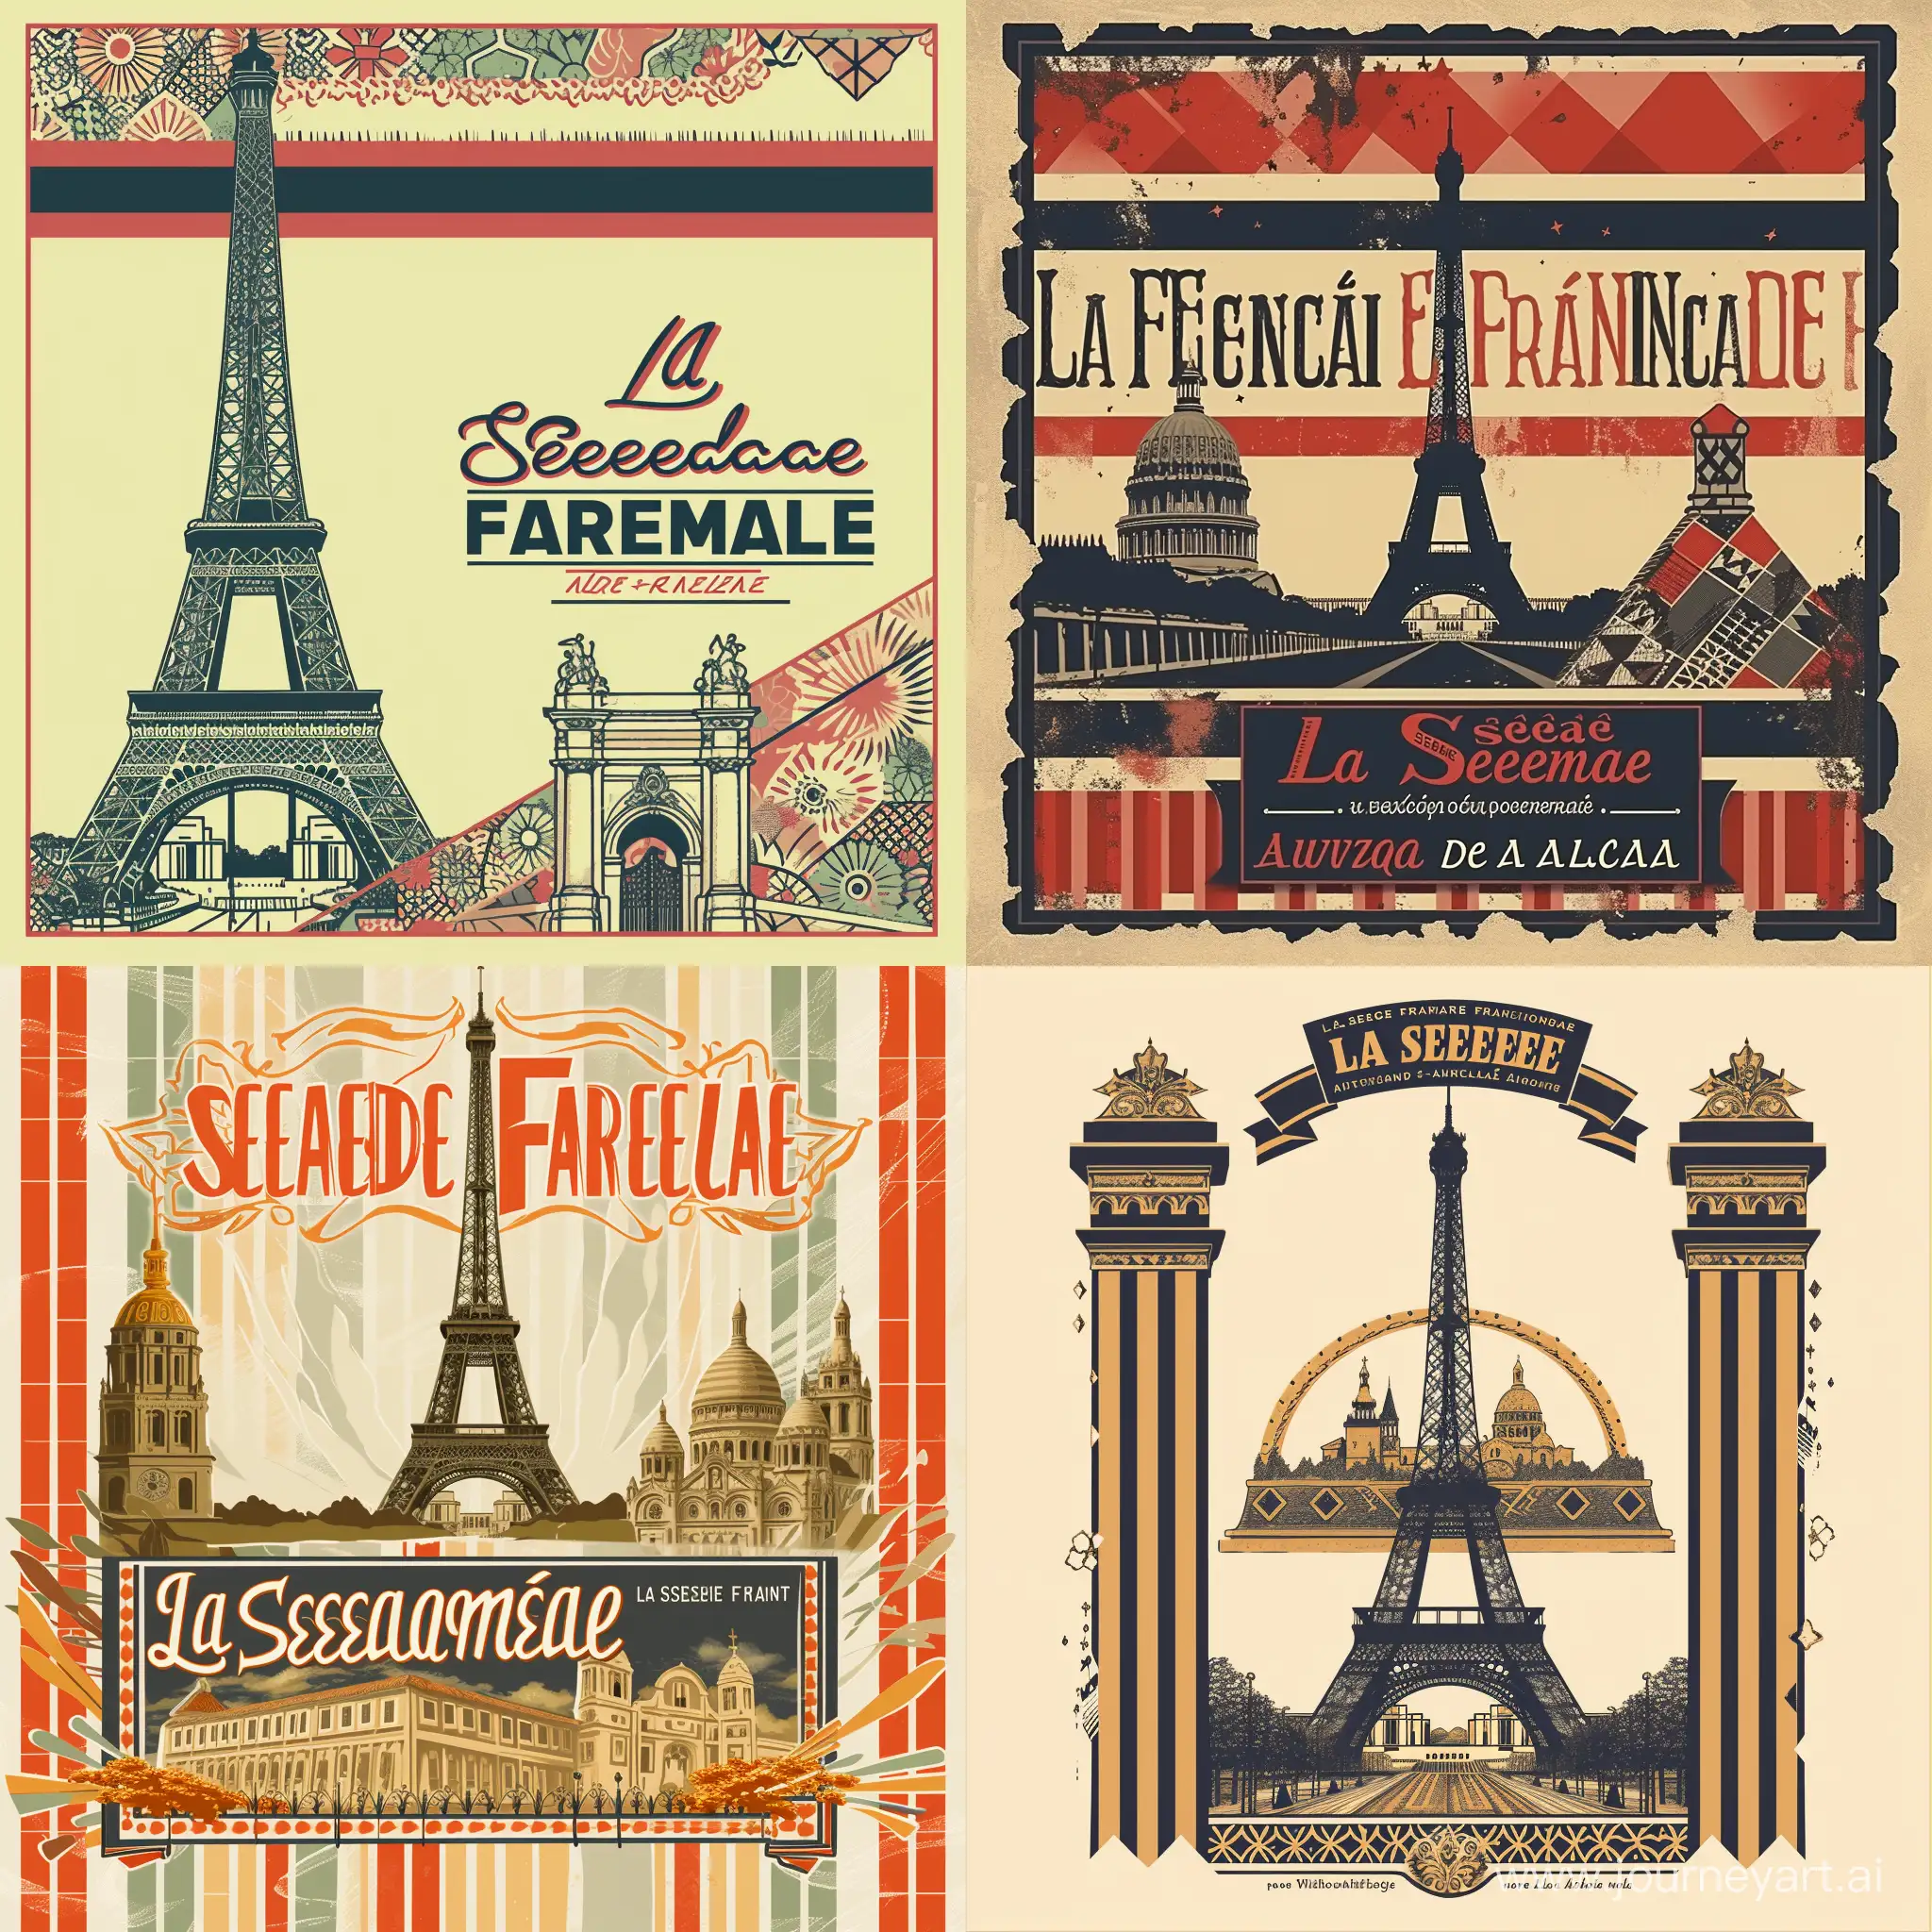 Design an elegant and cohesive logo that symbolizes the Franco-Spanish cultural union for 'La Semaine Française' event. The logo should artfully blend iconic landmarks, the Eiffel Tower and the Puerta de Alcalá, showcasing the harmony between French and Spanish cultures. Incorporate classic typography with a modern twist to reflect the French art de vivre. Additionally, create background elements inspired by the French marinière stripes and Spanish mosaic patterns. These should be subtle, serving as a refined backdrop for communication materials, adding depth and a cultural narrative to the design. Aim for a balance between elegance and modernity, ensuring the logo and graphic elements are versatile for various media formats.